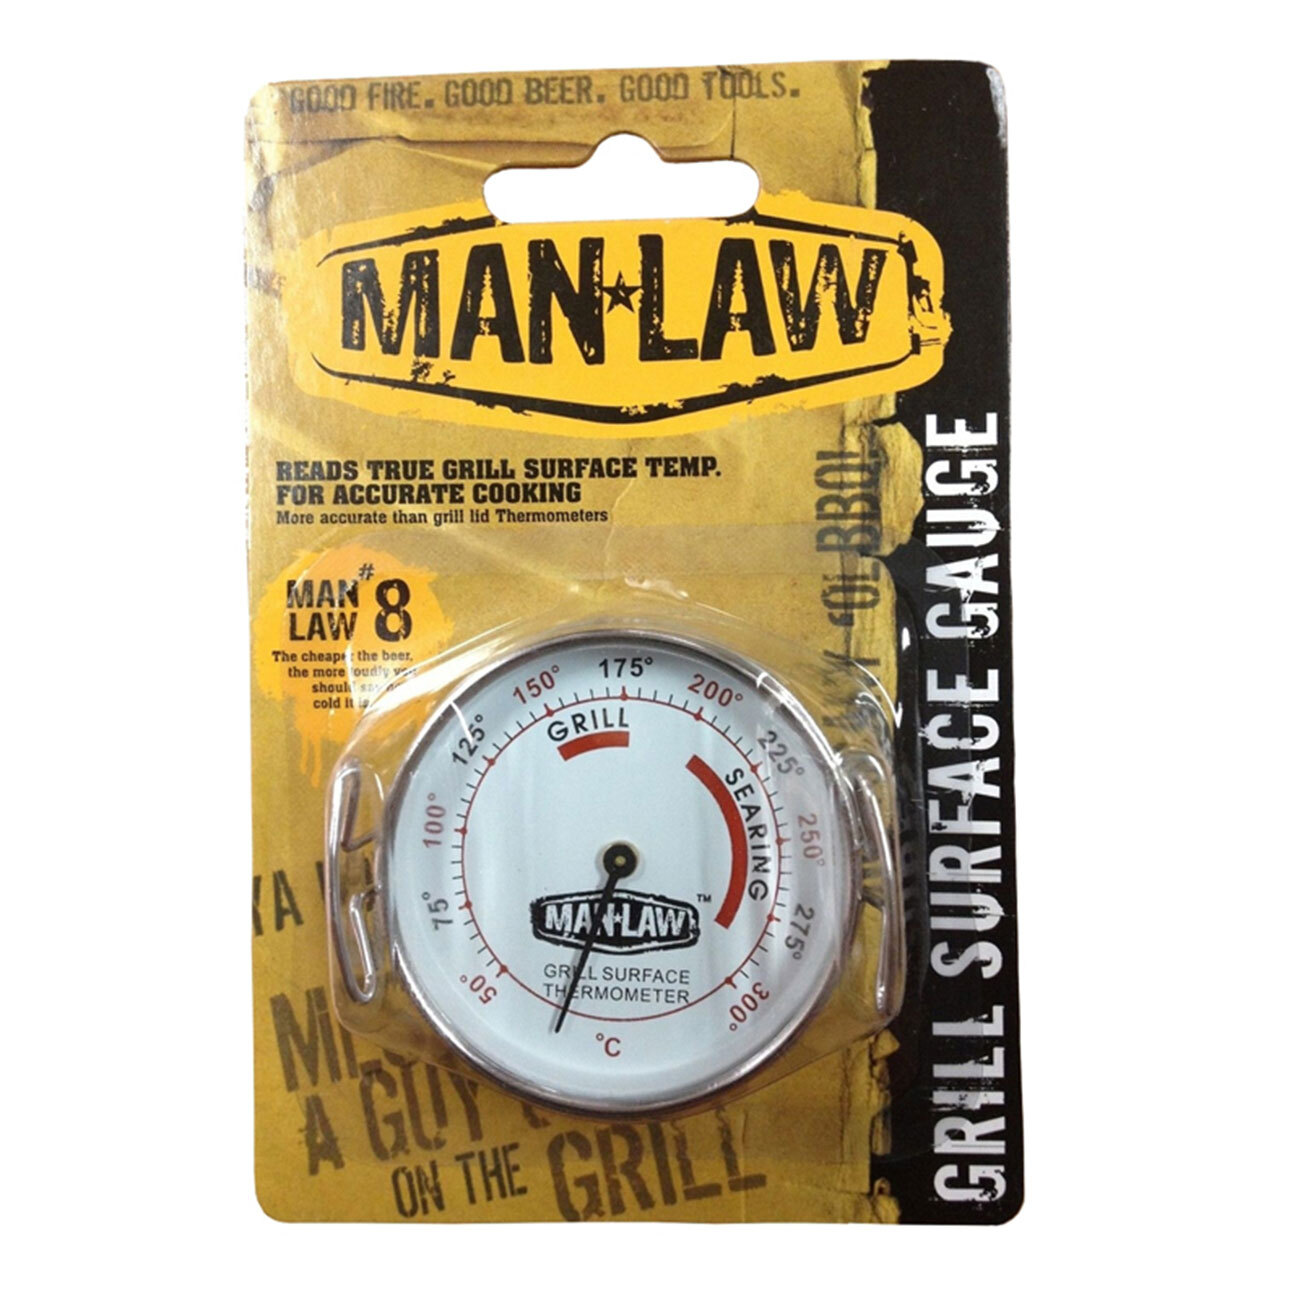 Man Law-T387 BBQ Grill Surface Thermometer 